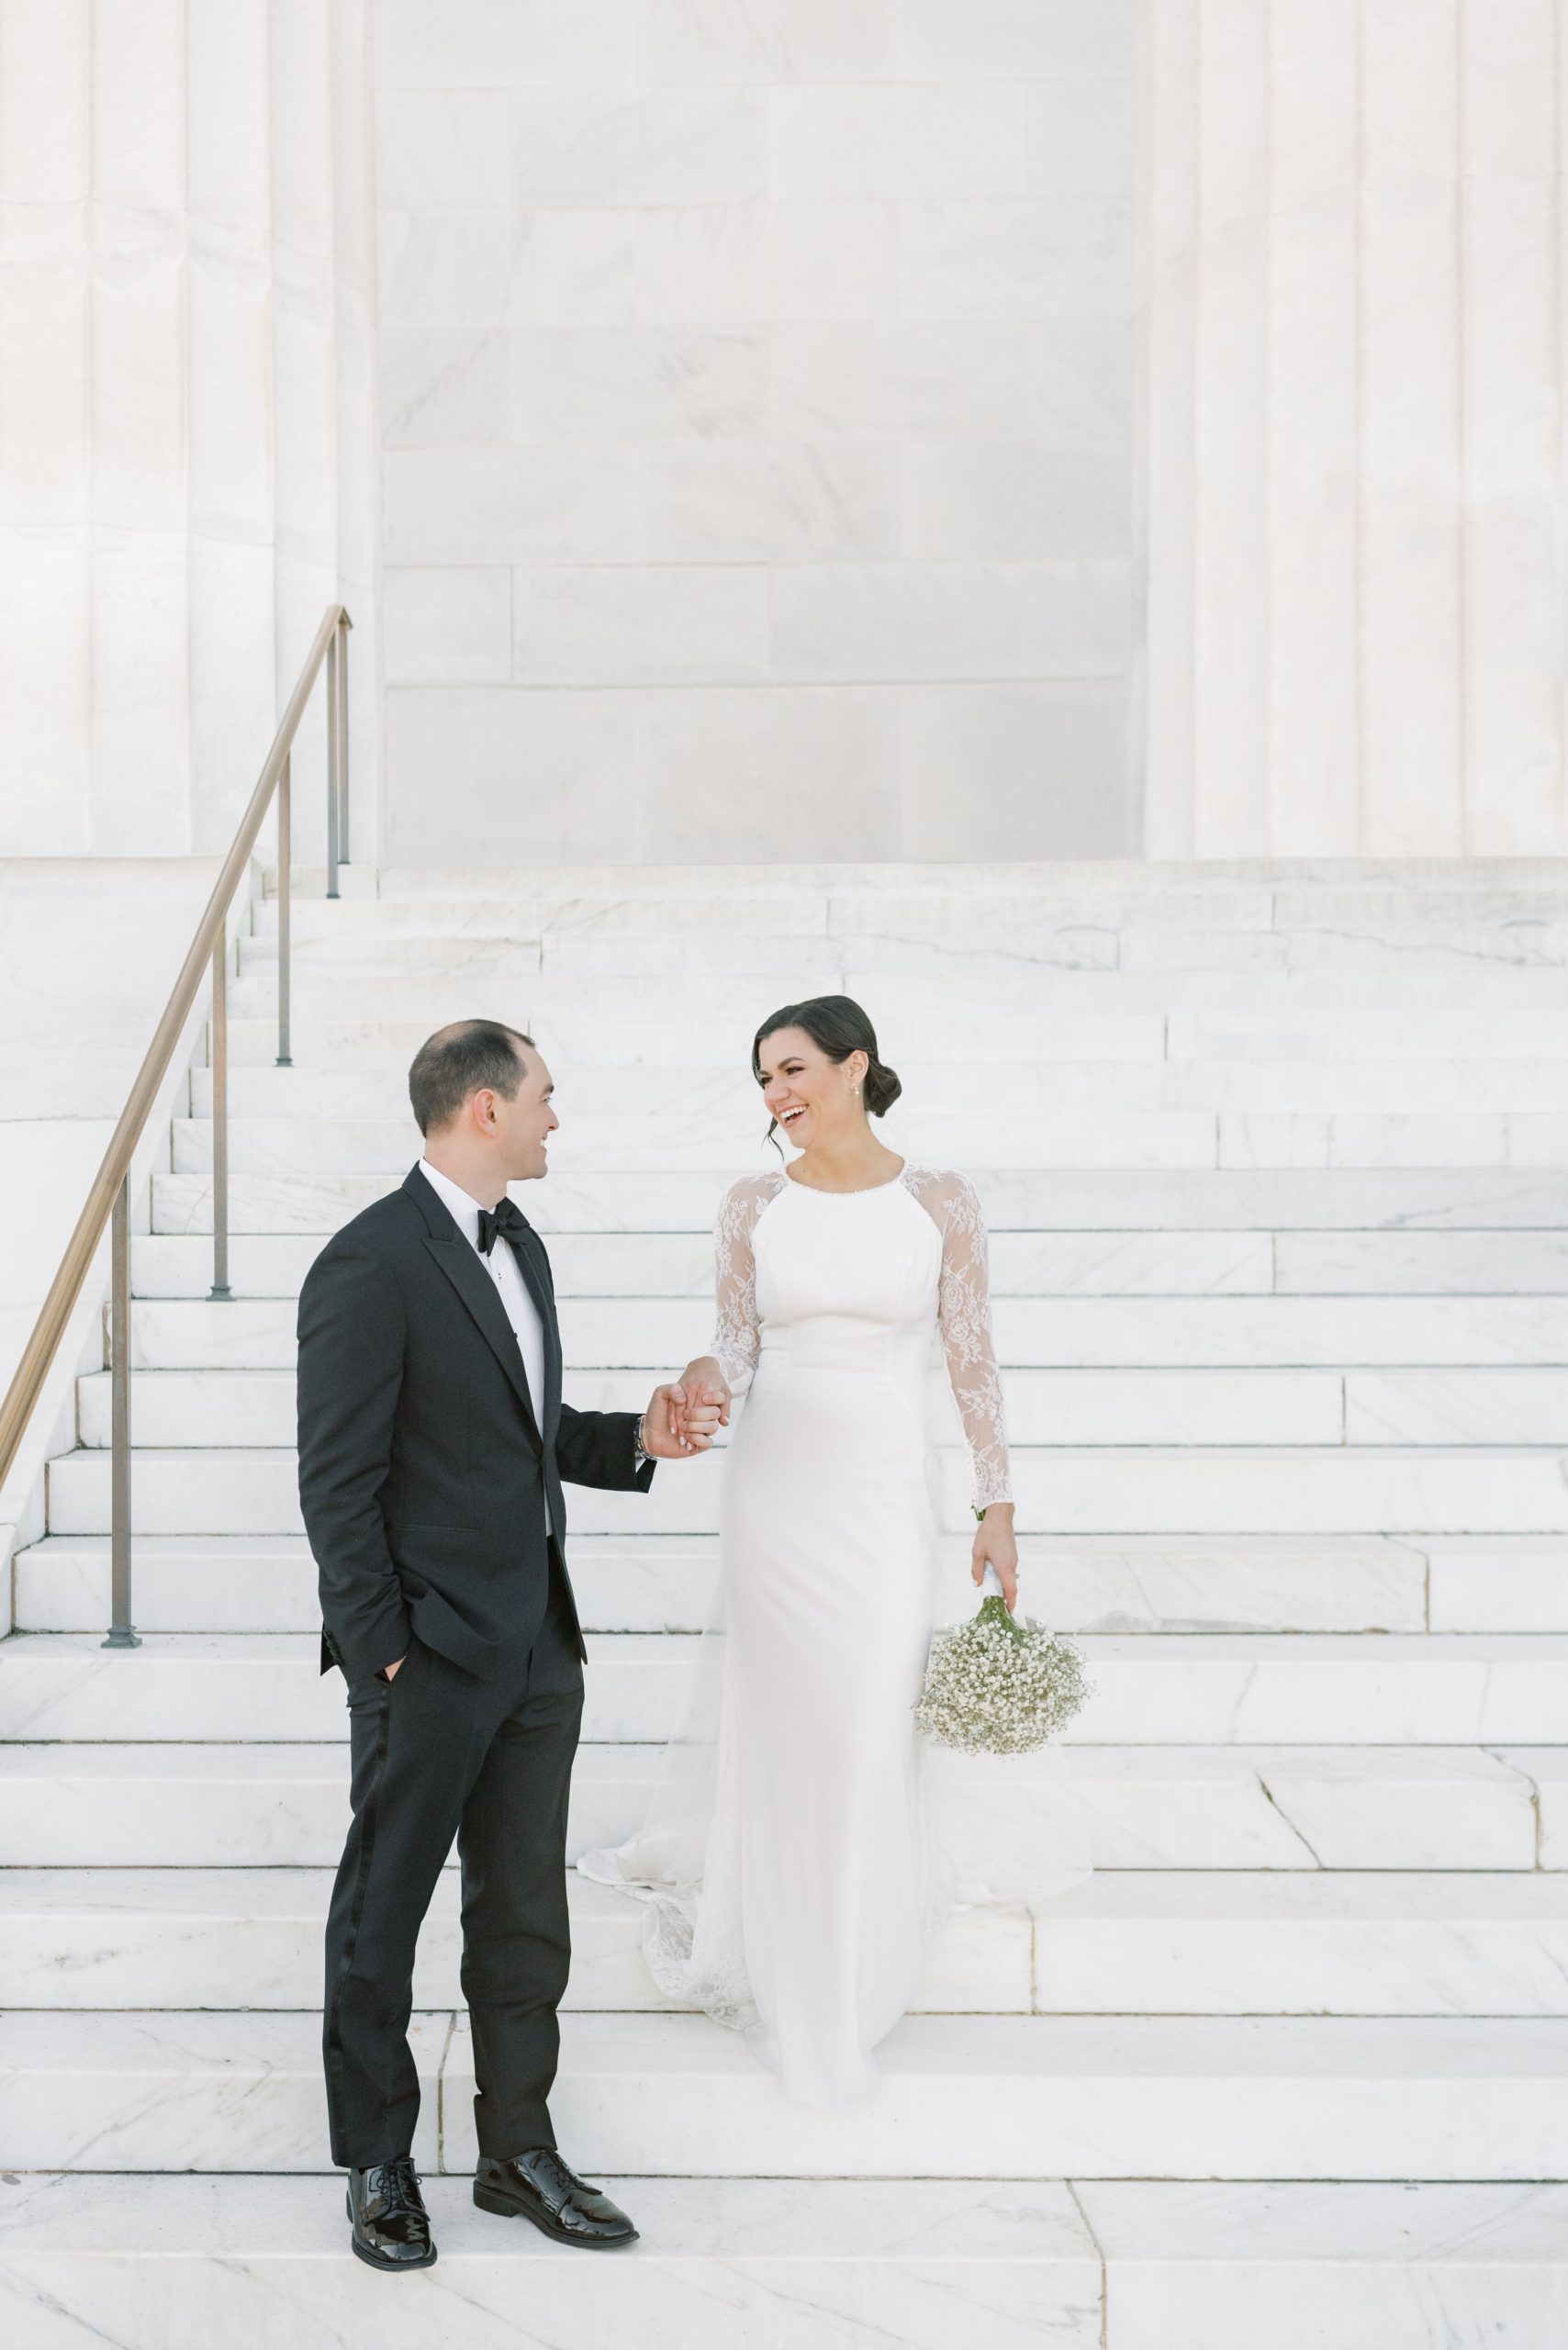 An intimate winter microwedding at St Dominic Church is Washington, DC followed by wedding portraits at the Lincoln Memorial.